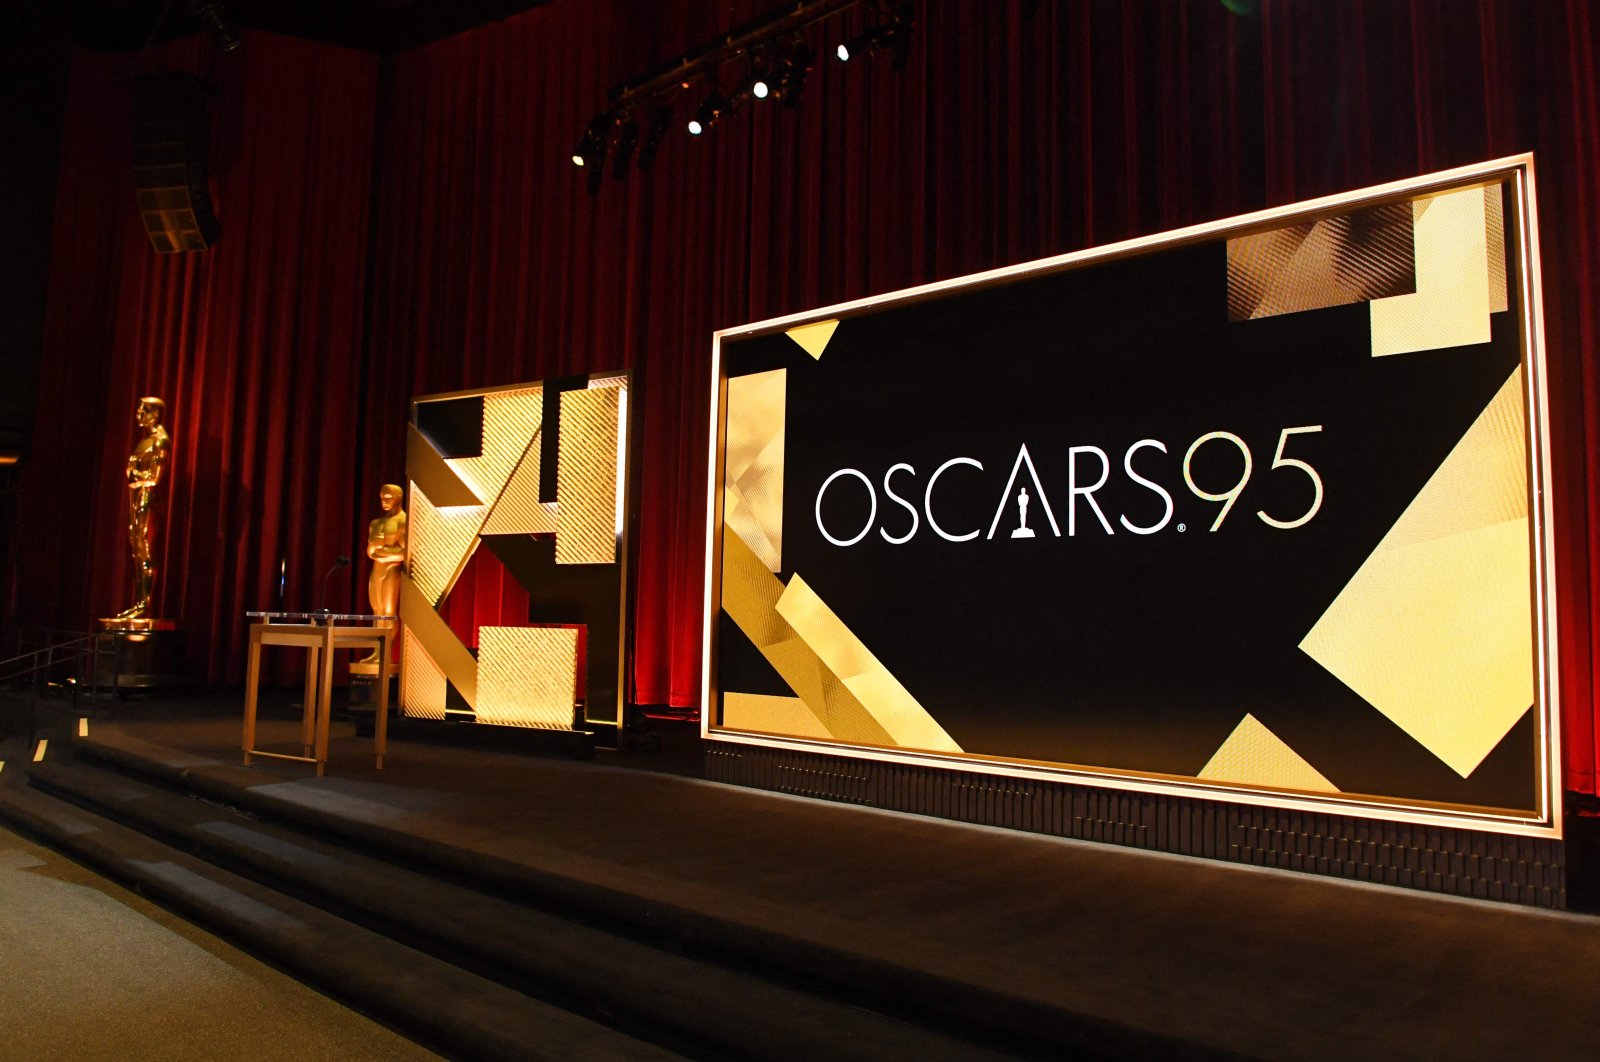 The stage is set for the 95th Academy Awards nominations announcement at the Samuel Goldwyn Theater in Beverly Hills, California, Jan. 24, 2023. (Photo by Valerie Macon / AFP)